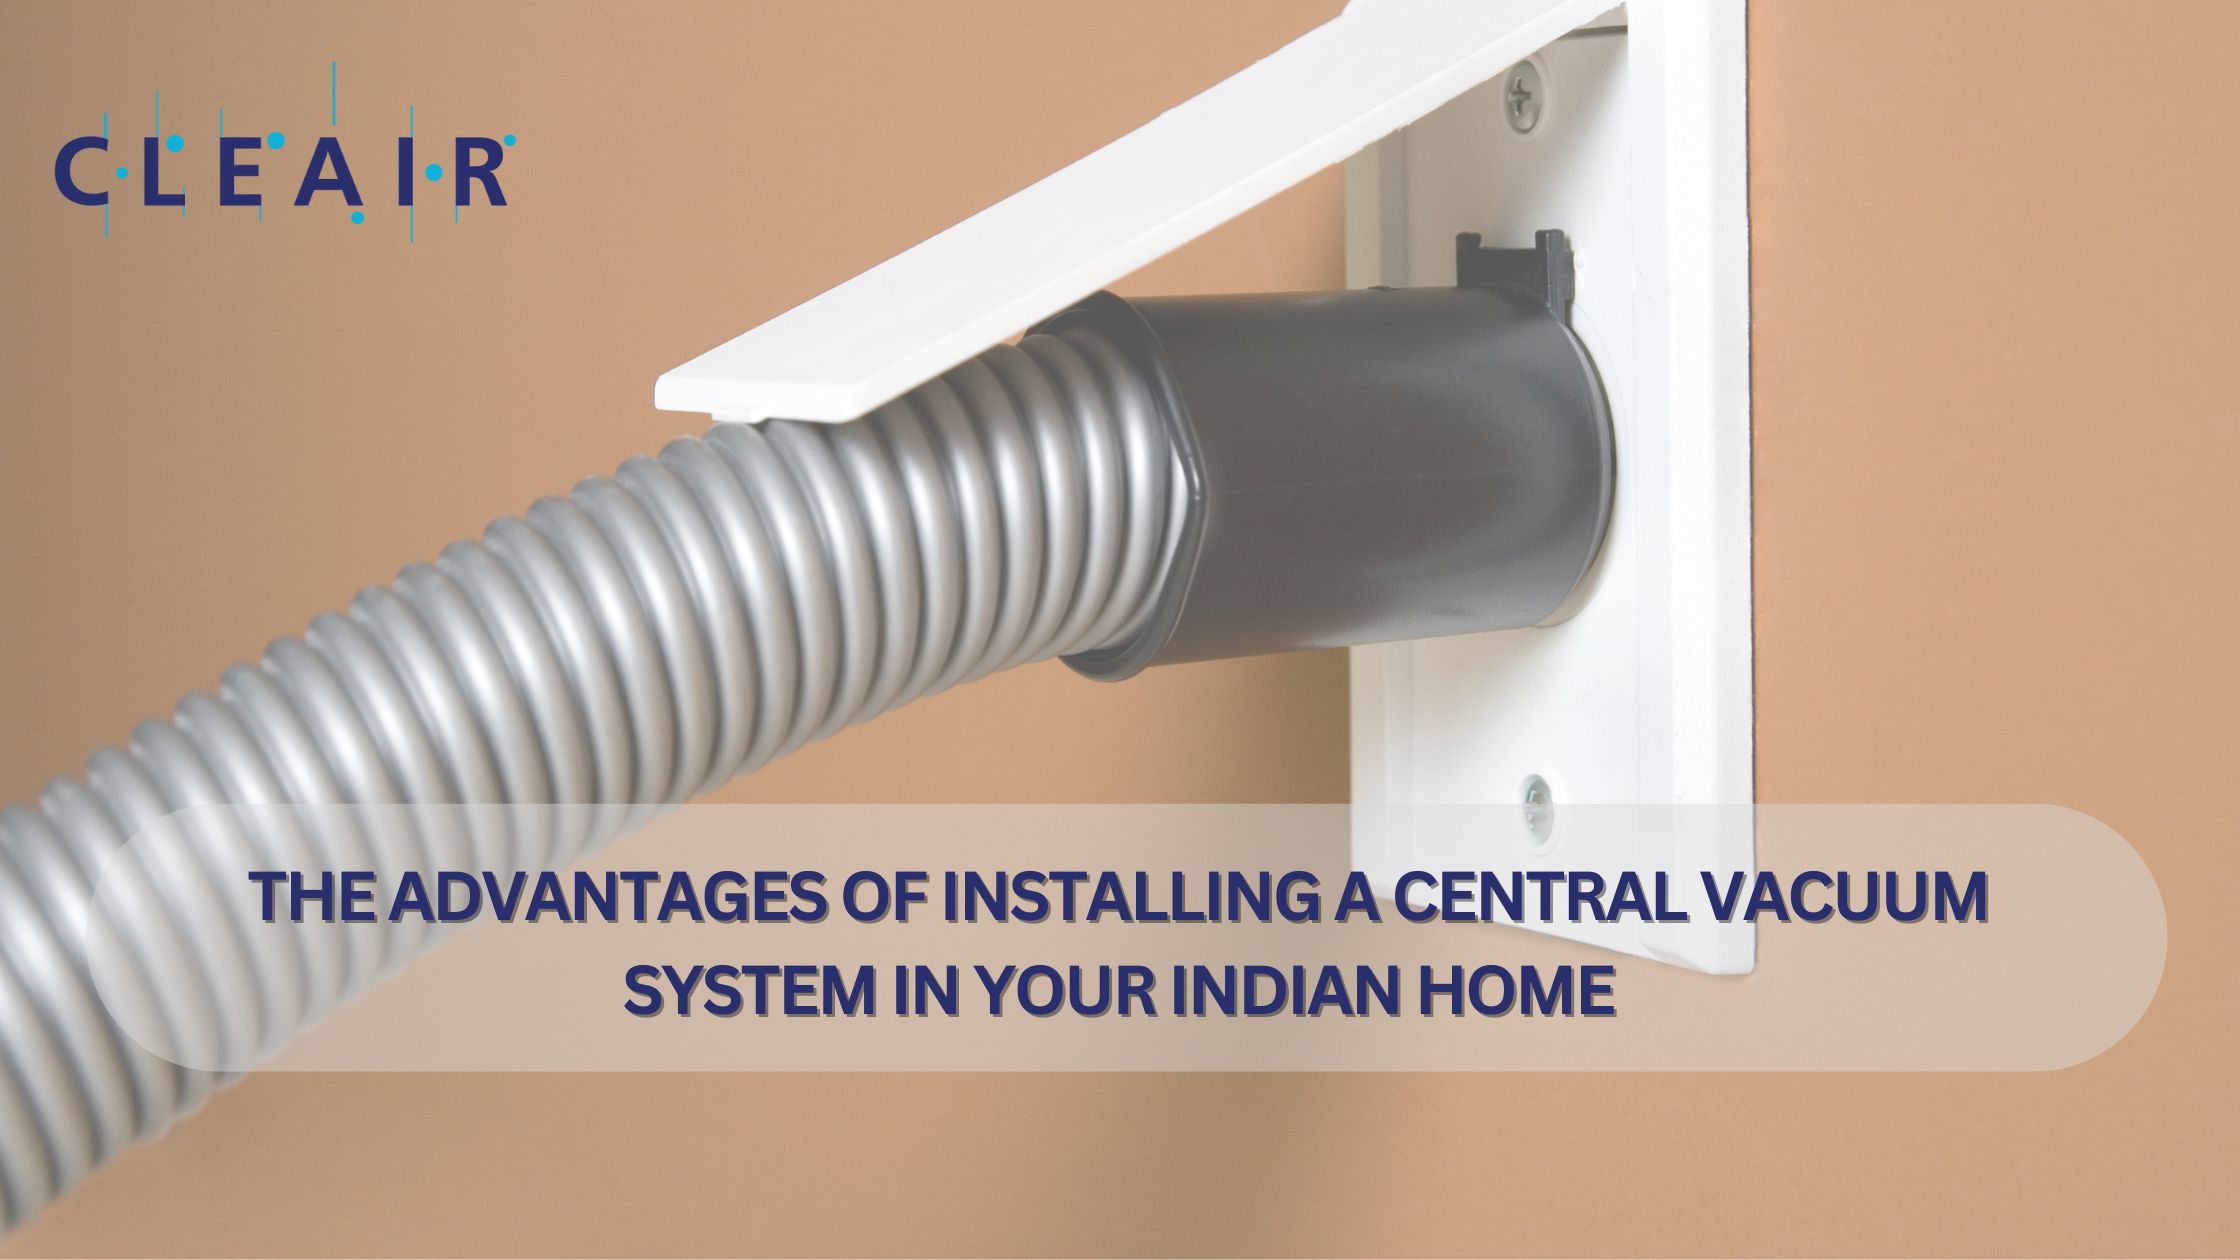 THE ADVANTAGES OF INSTALLING A CENTRAL VACUUM SYSTEM IN YOUR INDIAN HOME